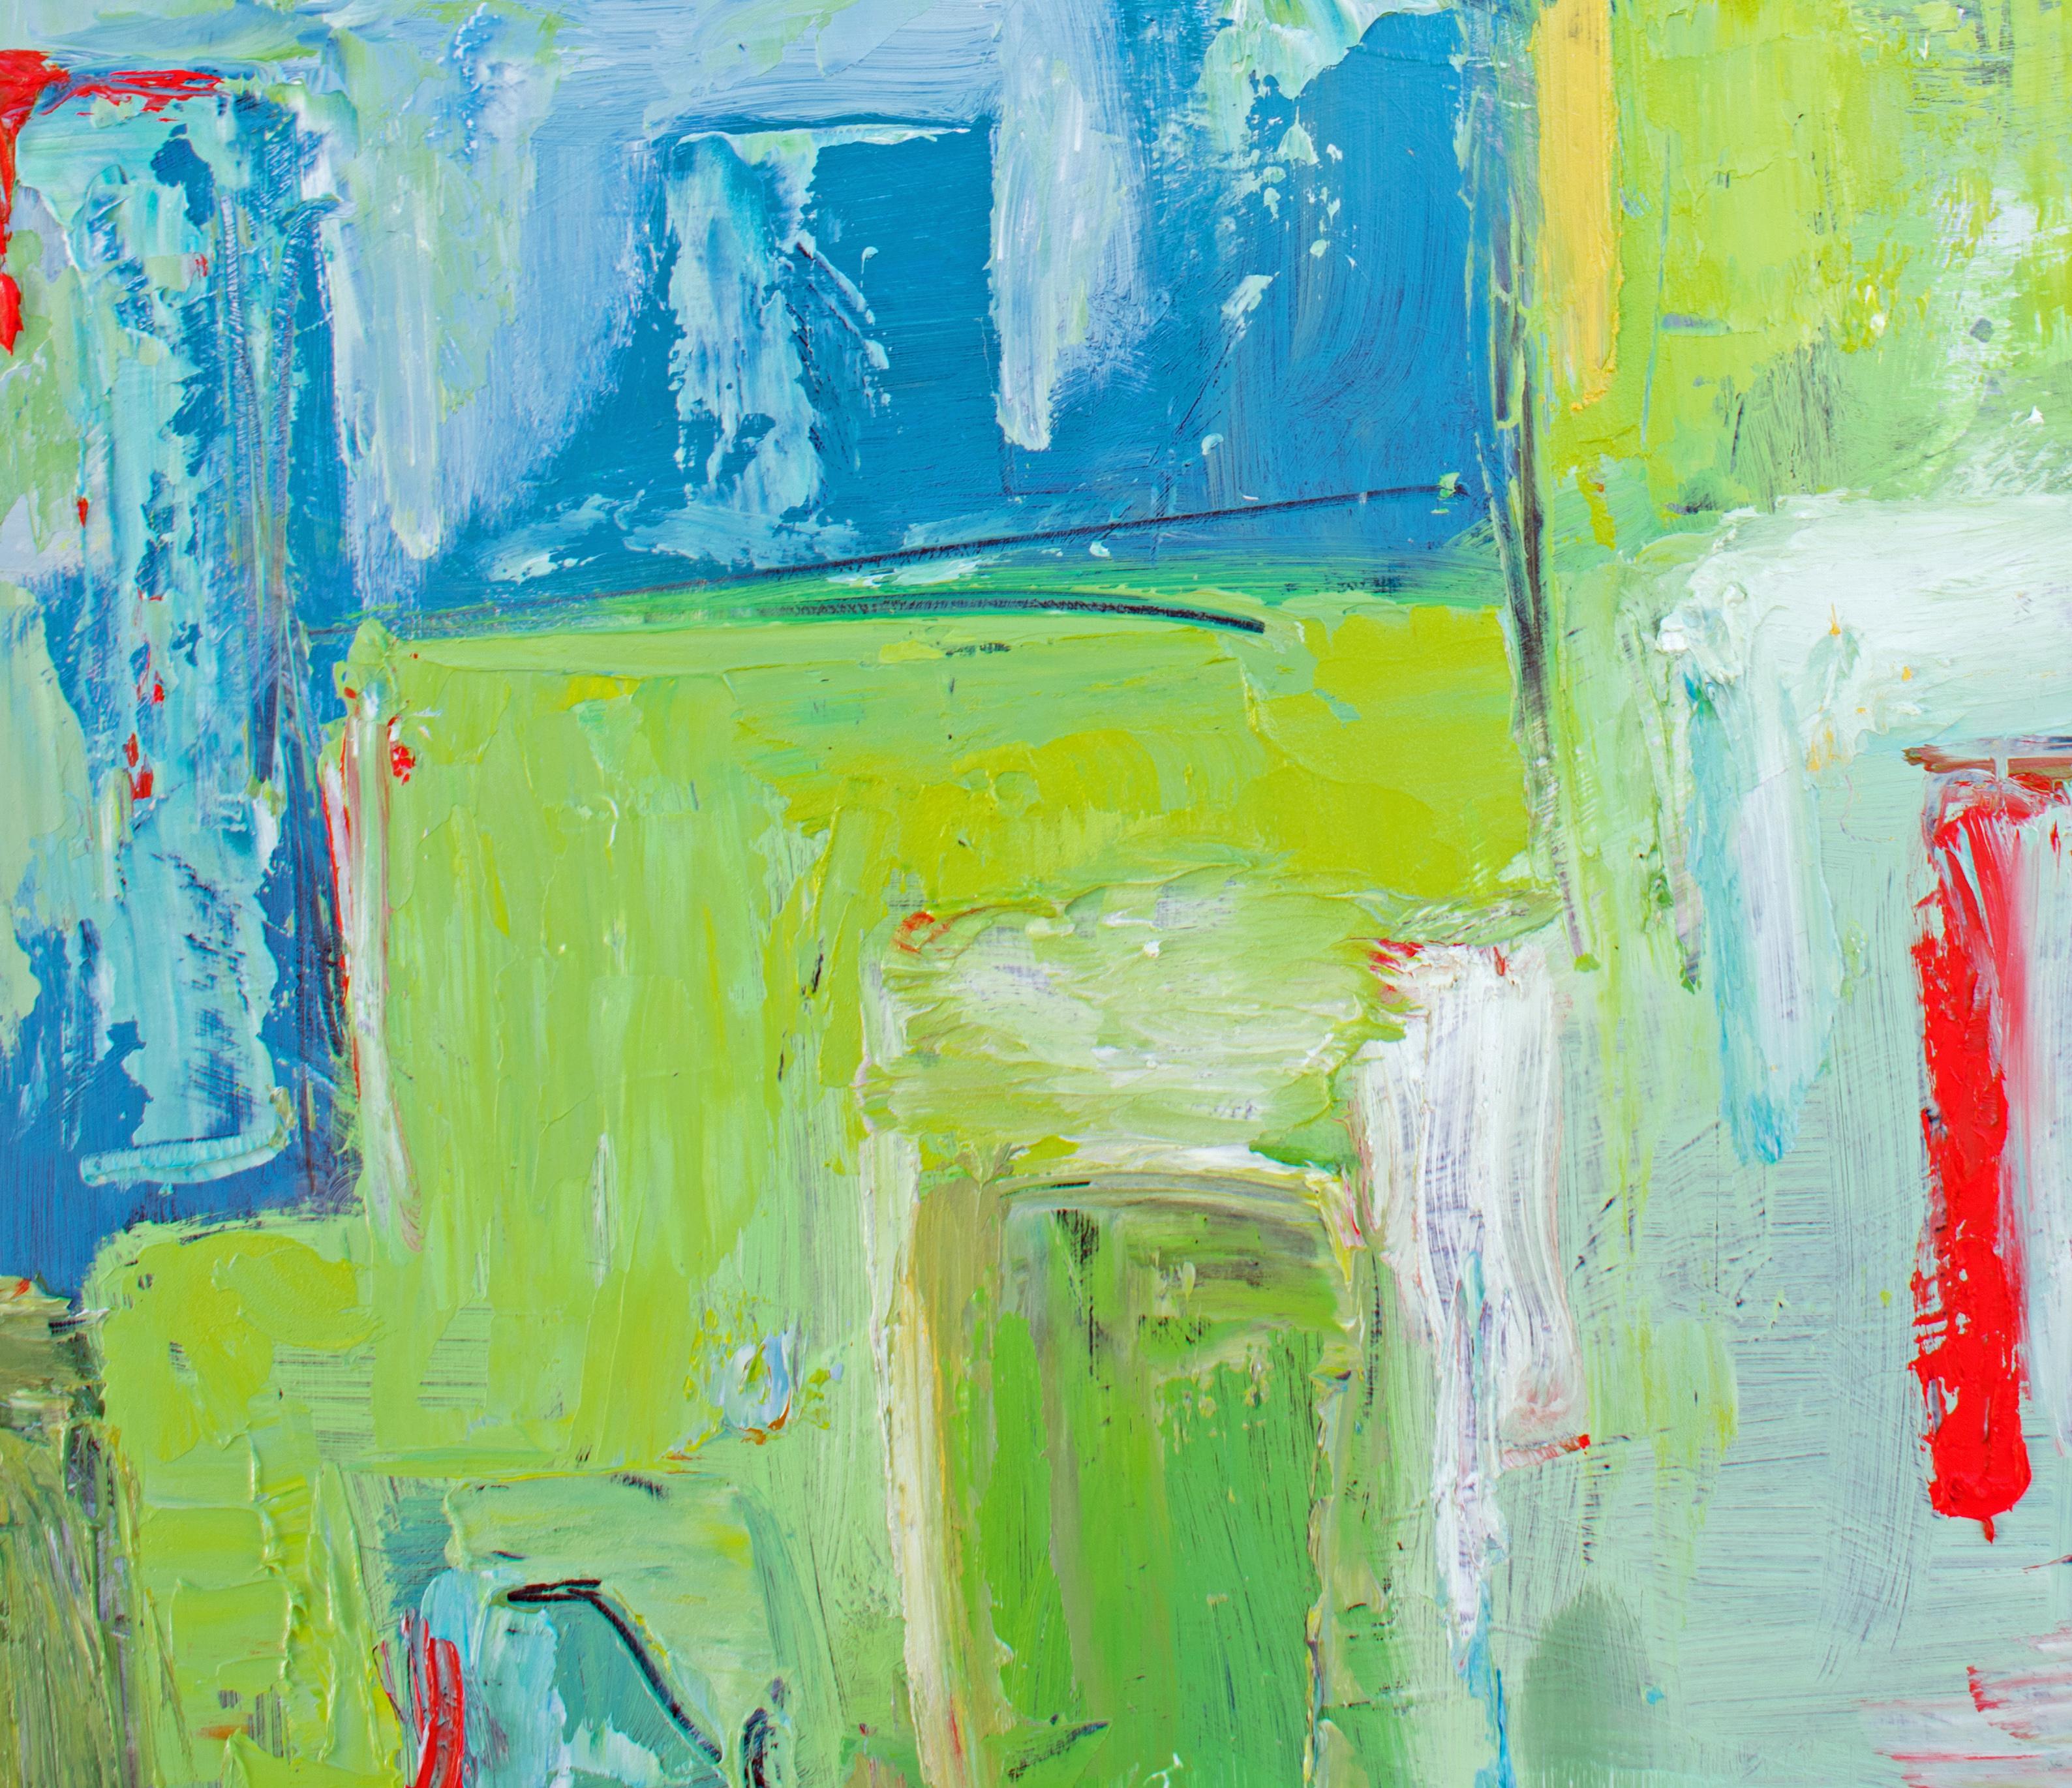 Windows - Green Abstract Painting by Sharon Sieben